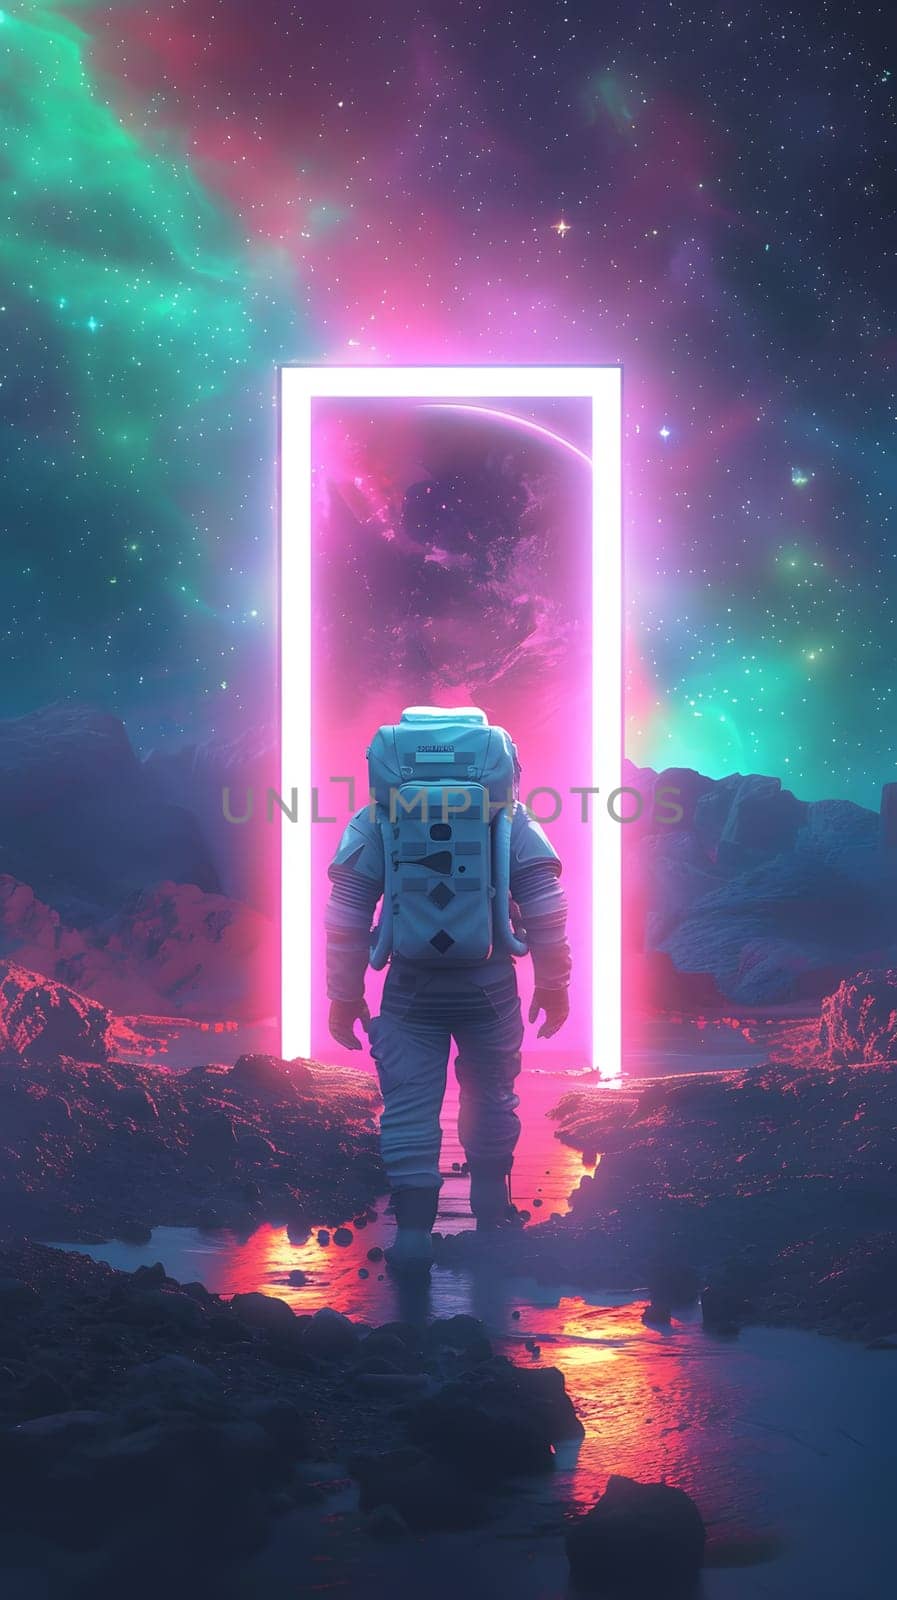 An astronaut is standing by a purple door in space by Nadtochiy